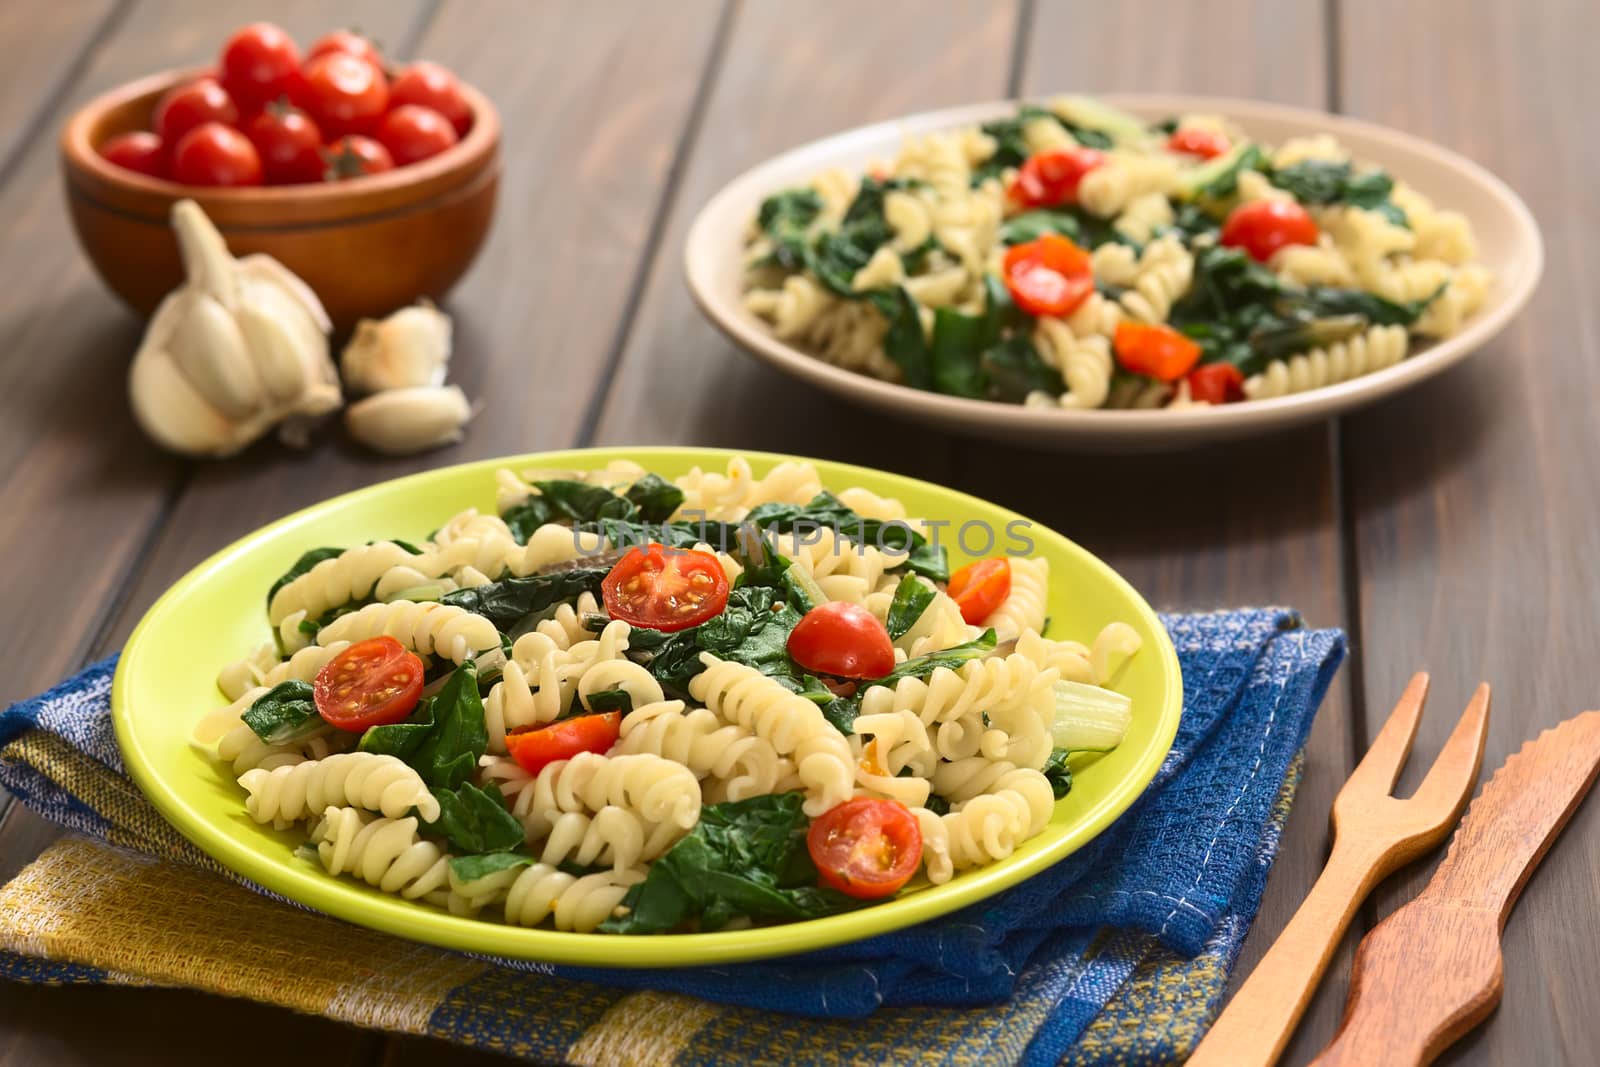 Two plates of fusilli pasta with chard leaves (lat. Beta vulgaris) and cherry tomatoes, photographed on dark wood with natural light (Selective Focus, Focus in the middle of the first dish)